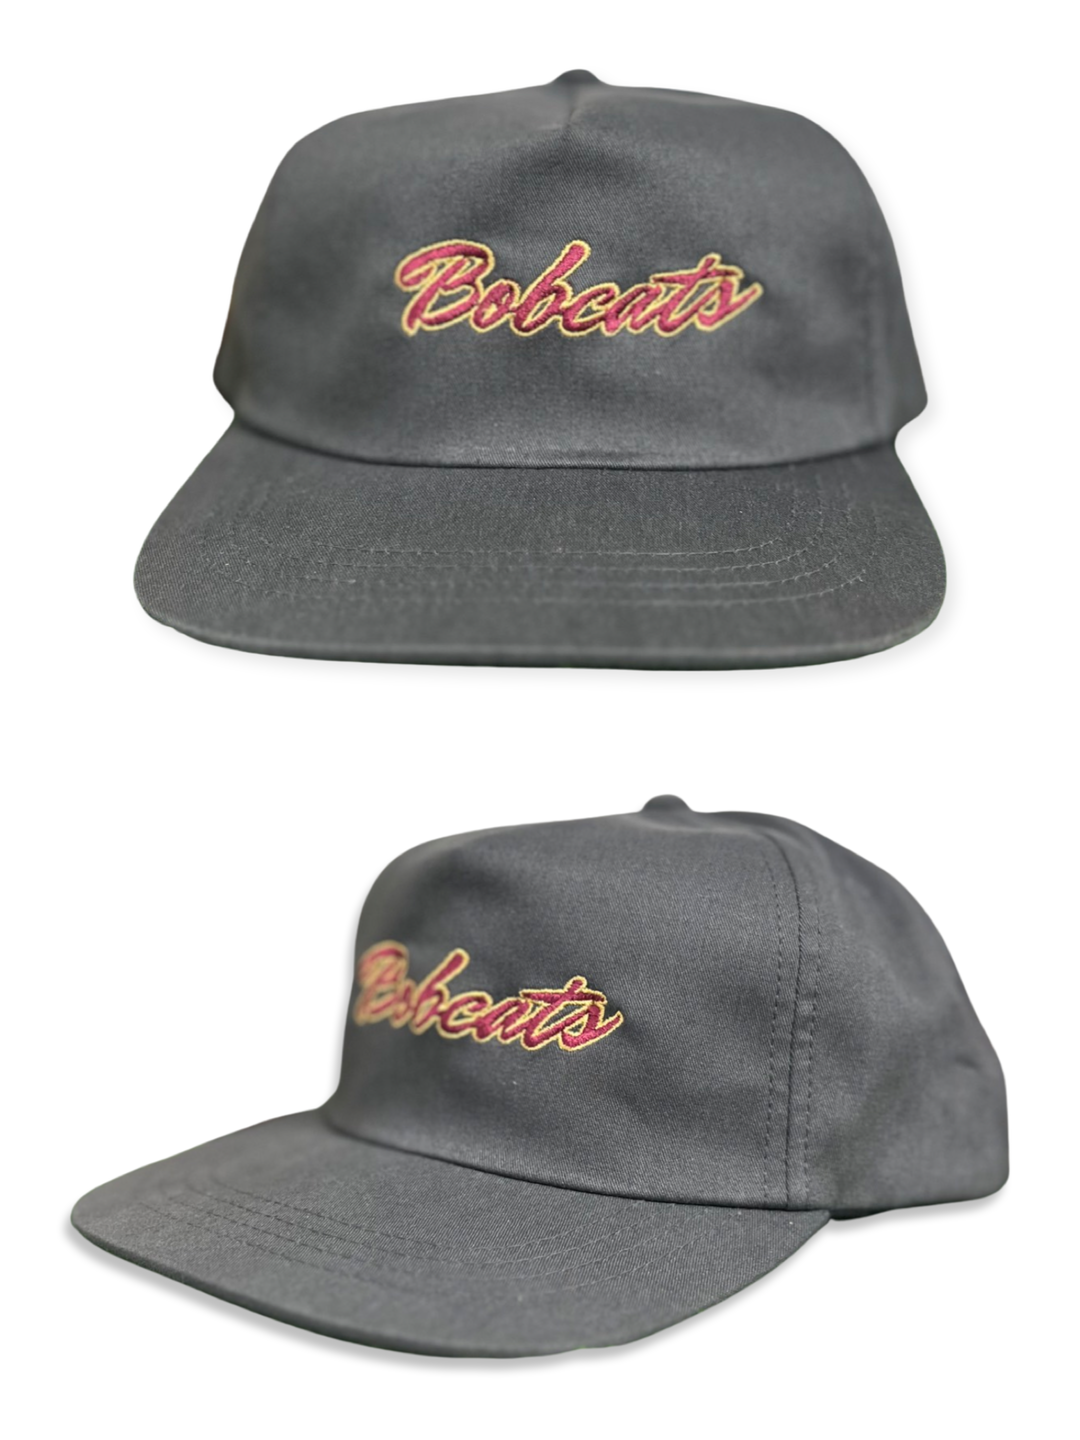 Texas State Bobcats Script Canvas Snapback / Hat / Embroidered / TXST025 / MM